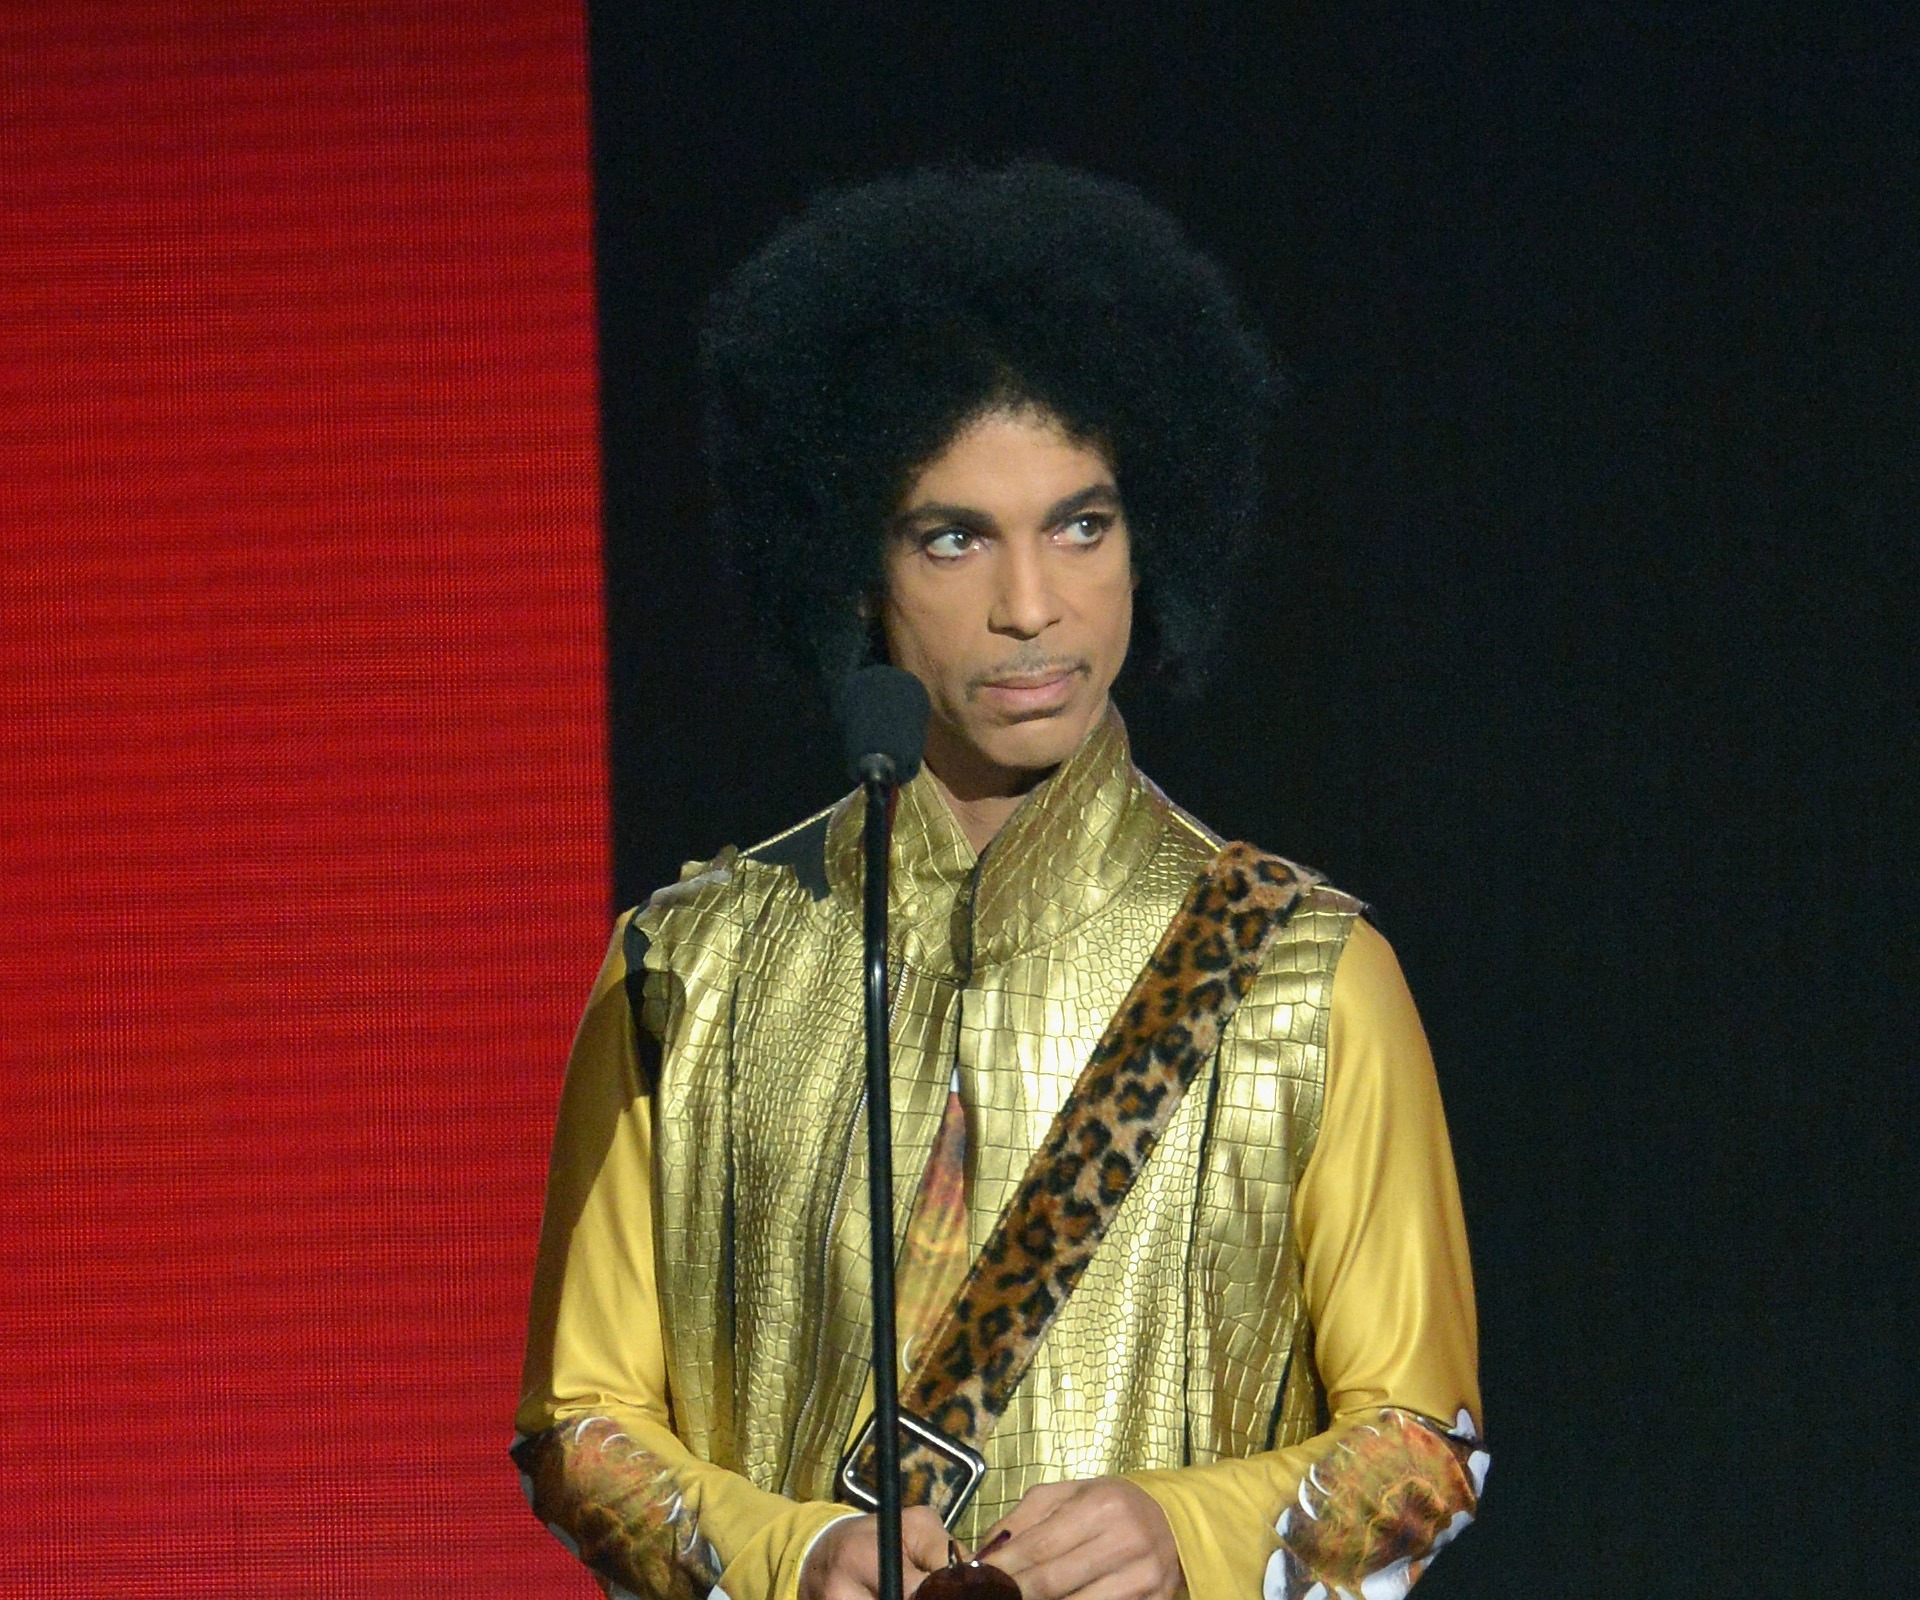 Prince’s autopsy says death was not a suicide